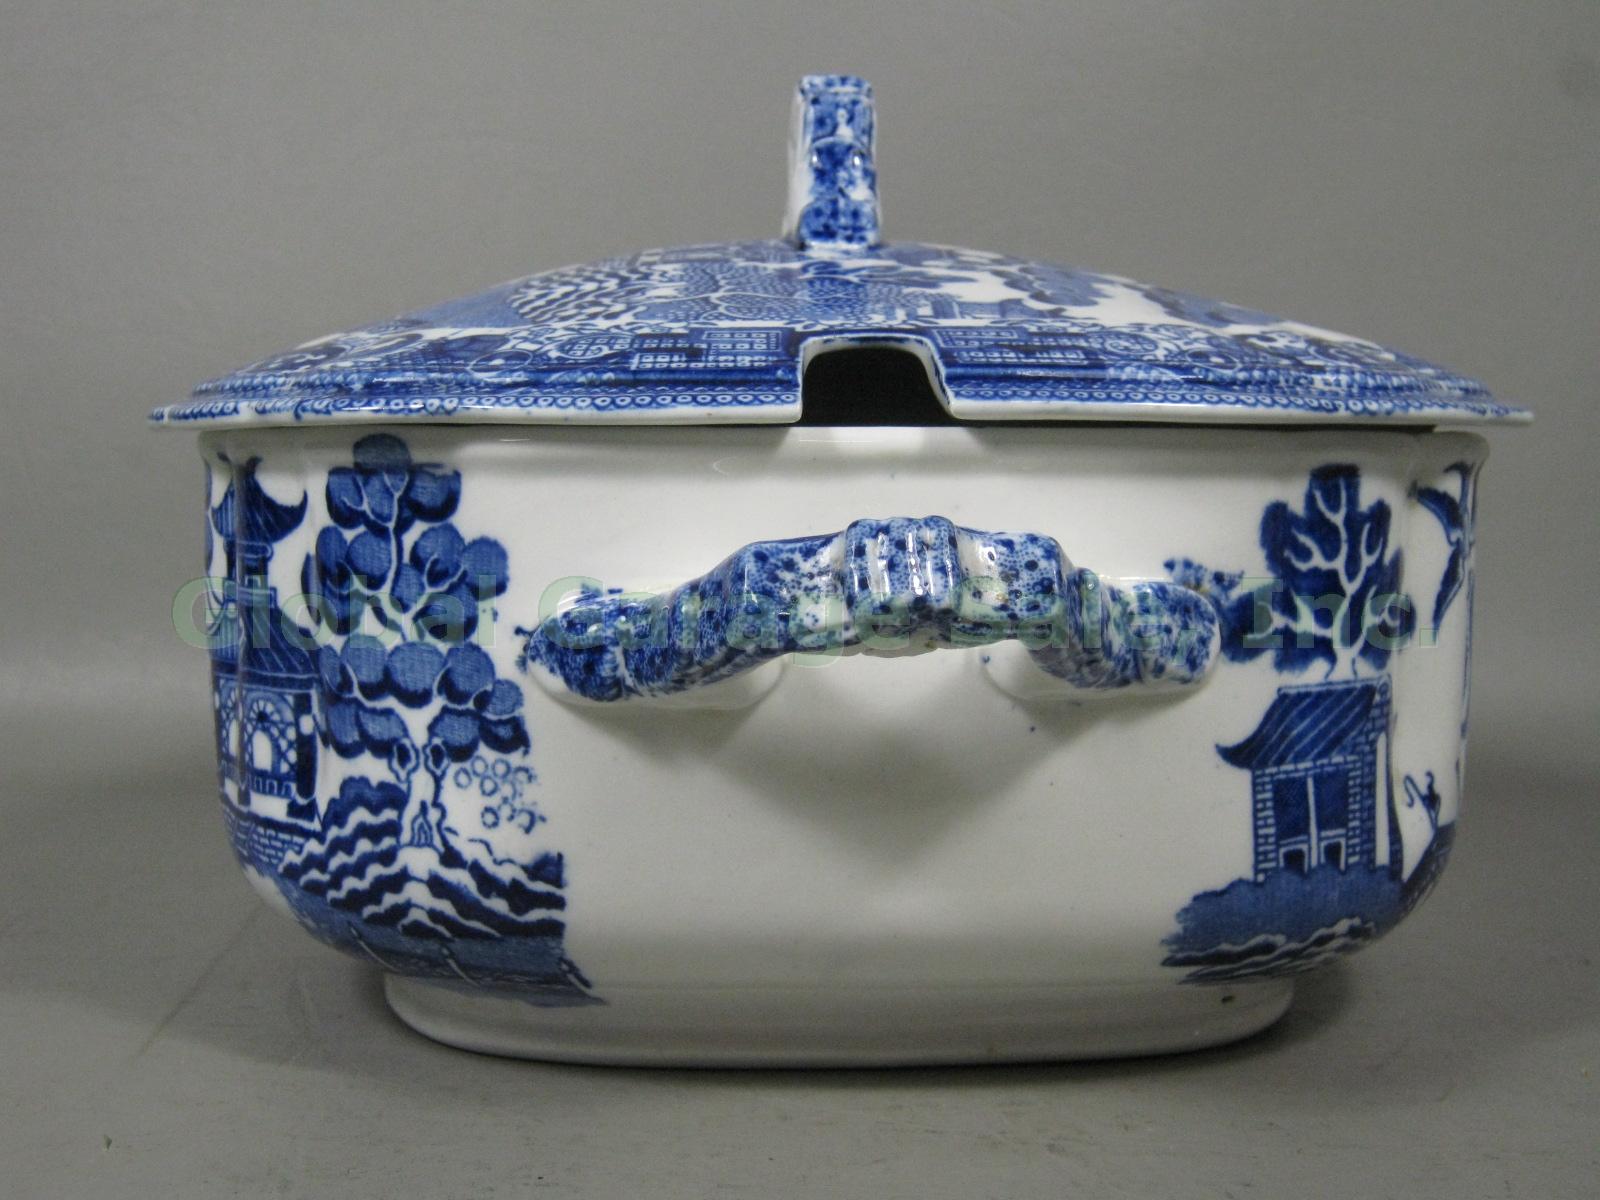 Antique Wedgwood Blue Willow 9" Soup Tureen + Ladle Transferware England EXC! NR 2